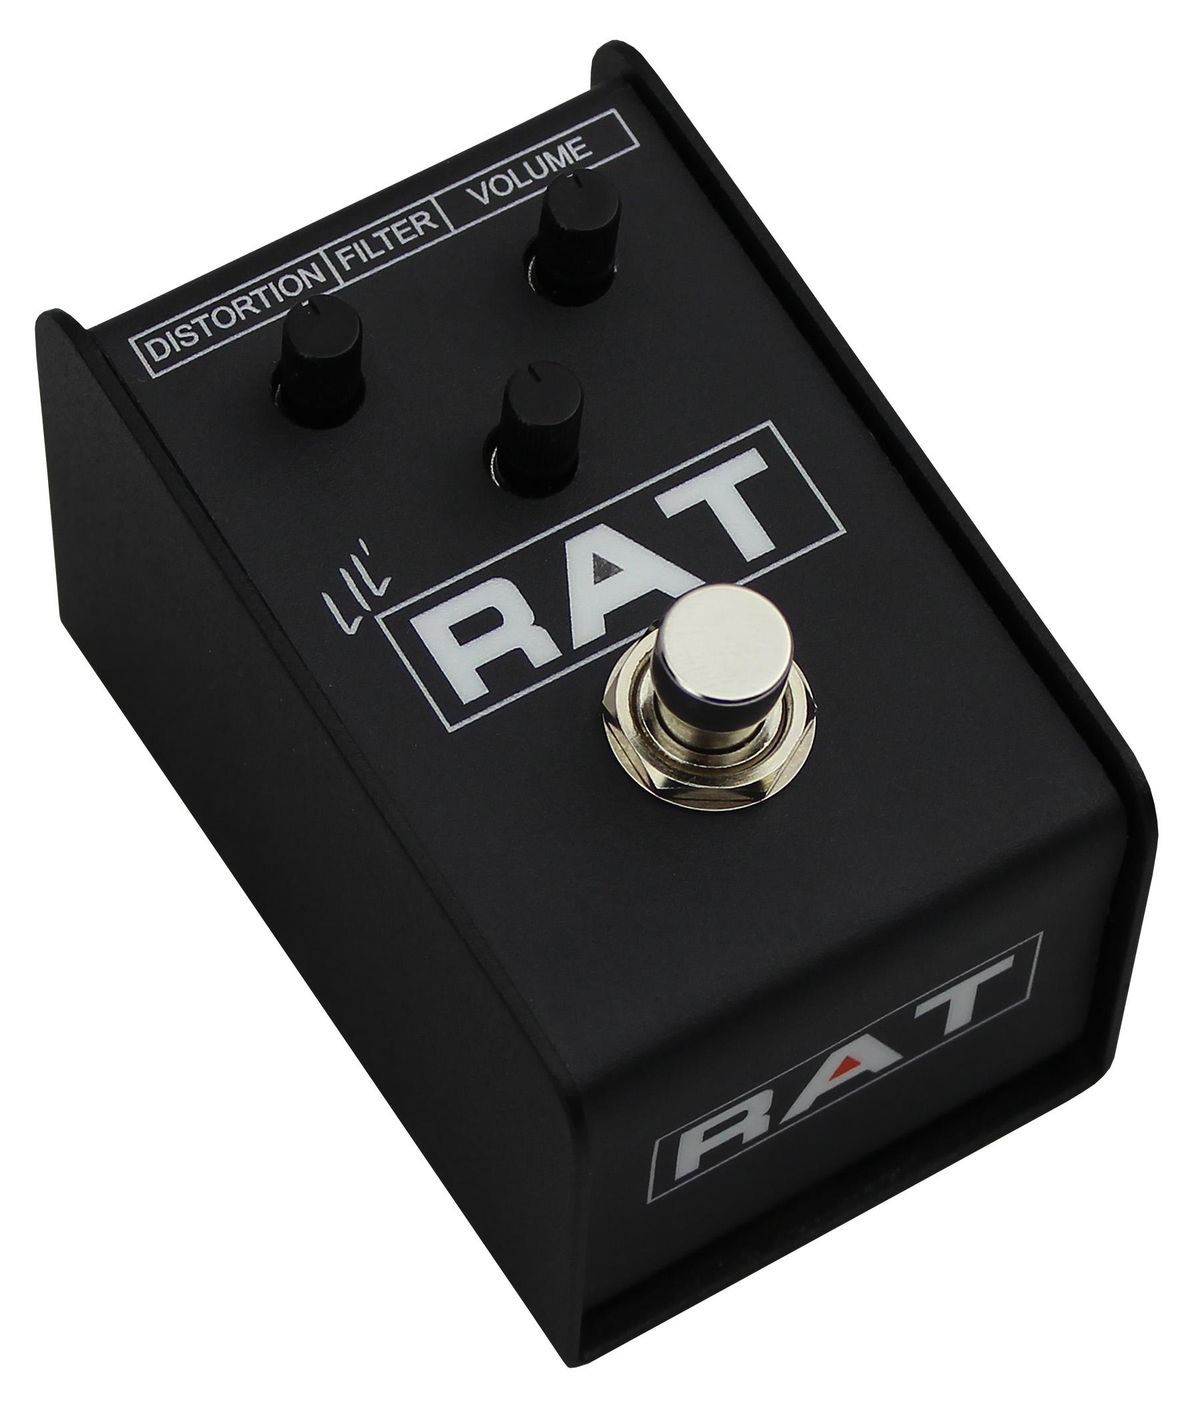 ACT Entertainment to Present the ProCo Lil’ RAT at ​NAMM 2022